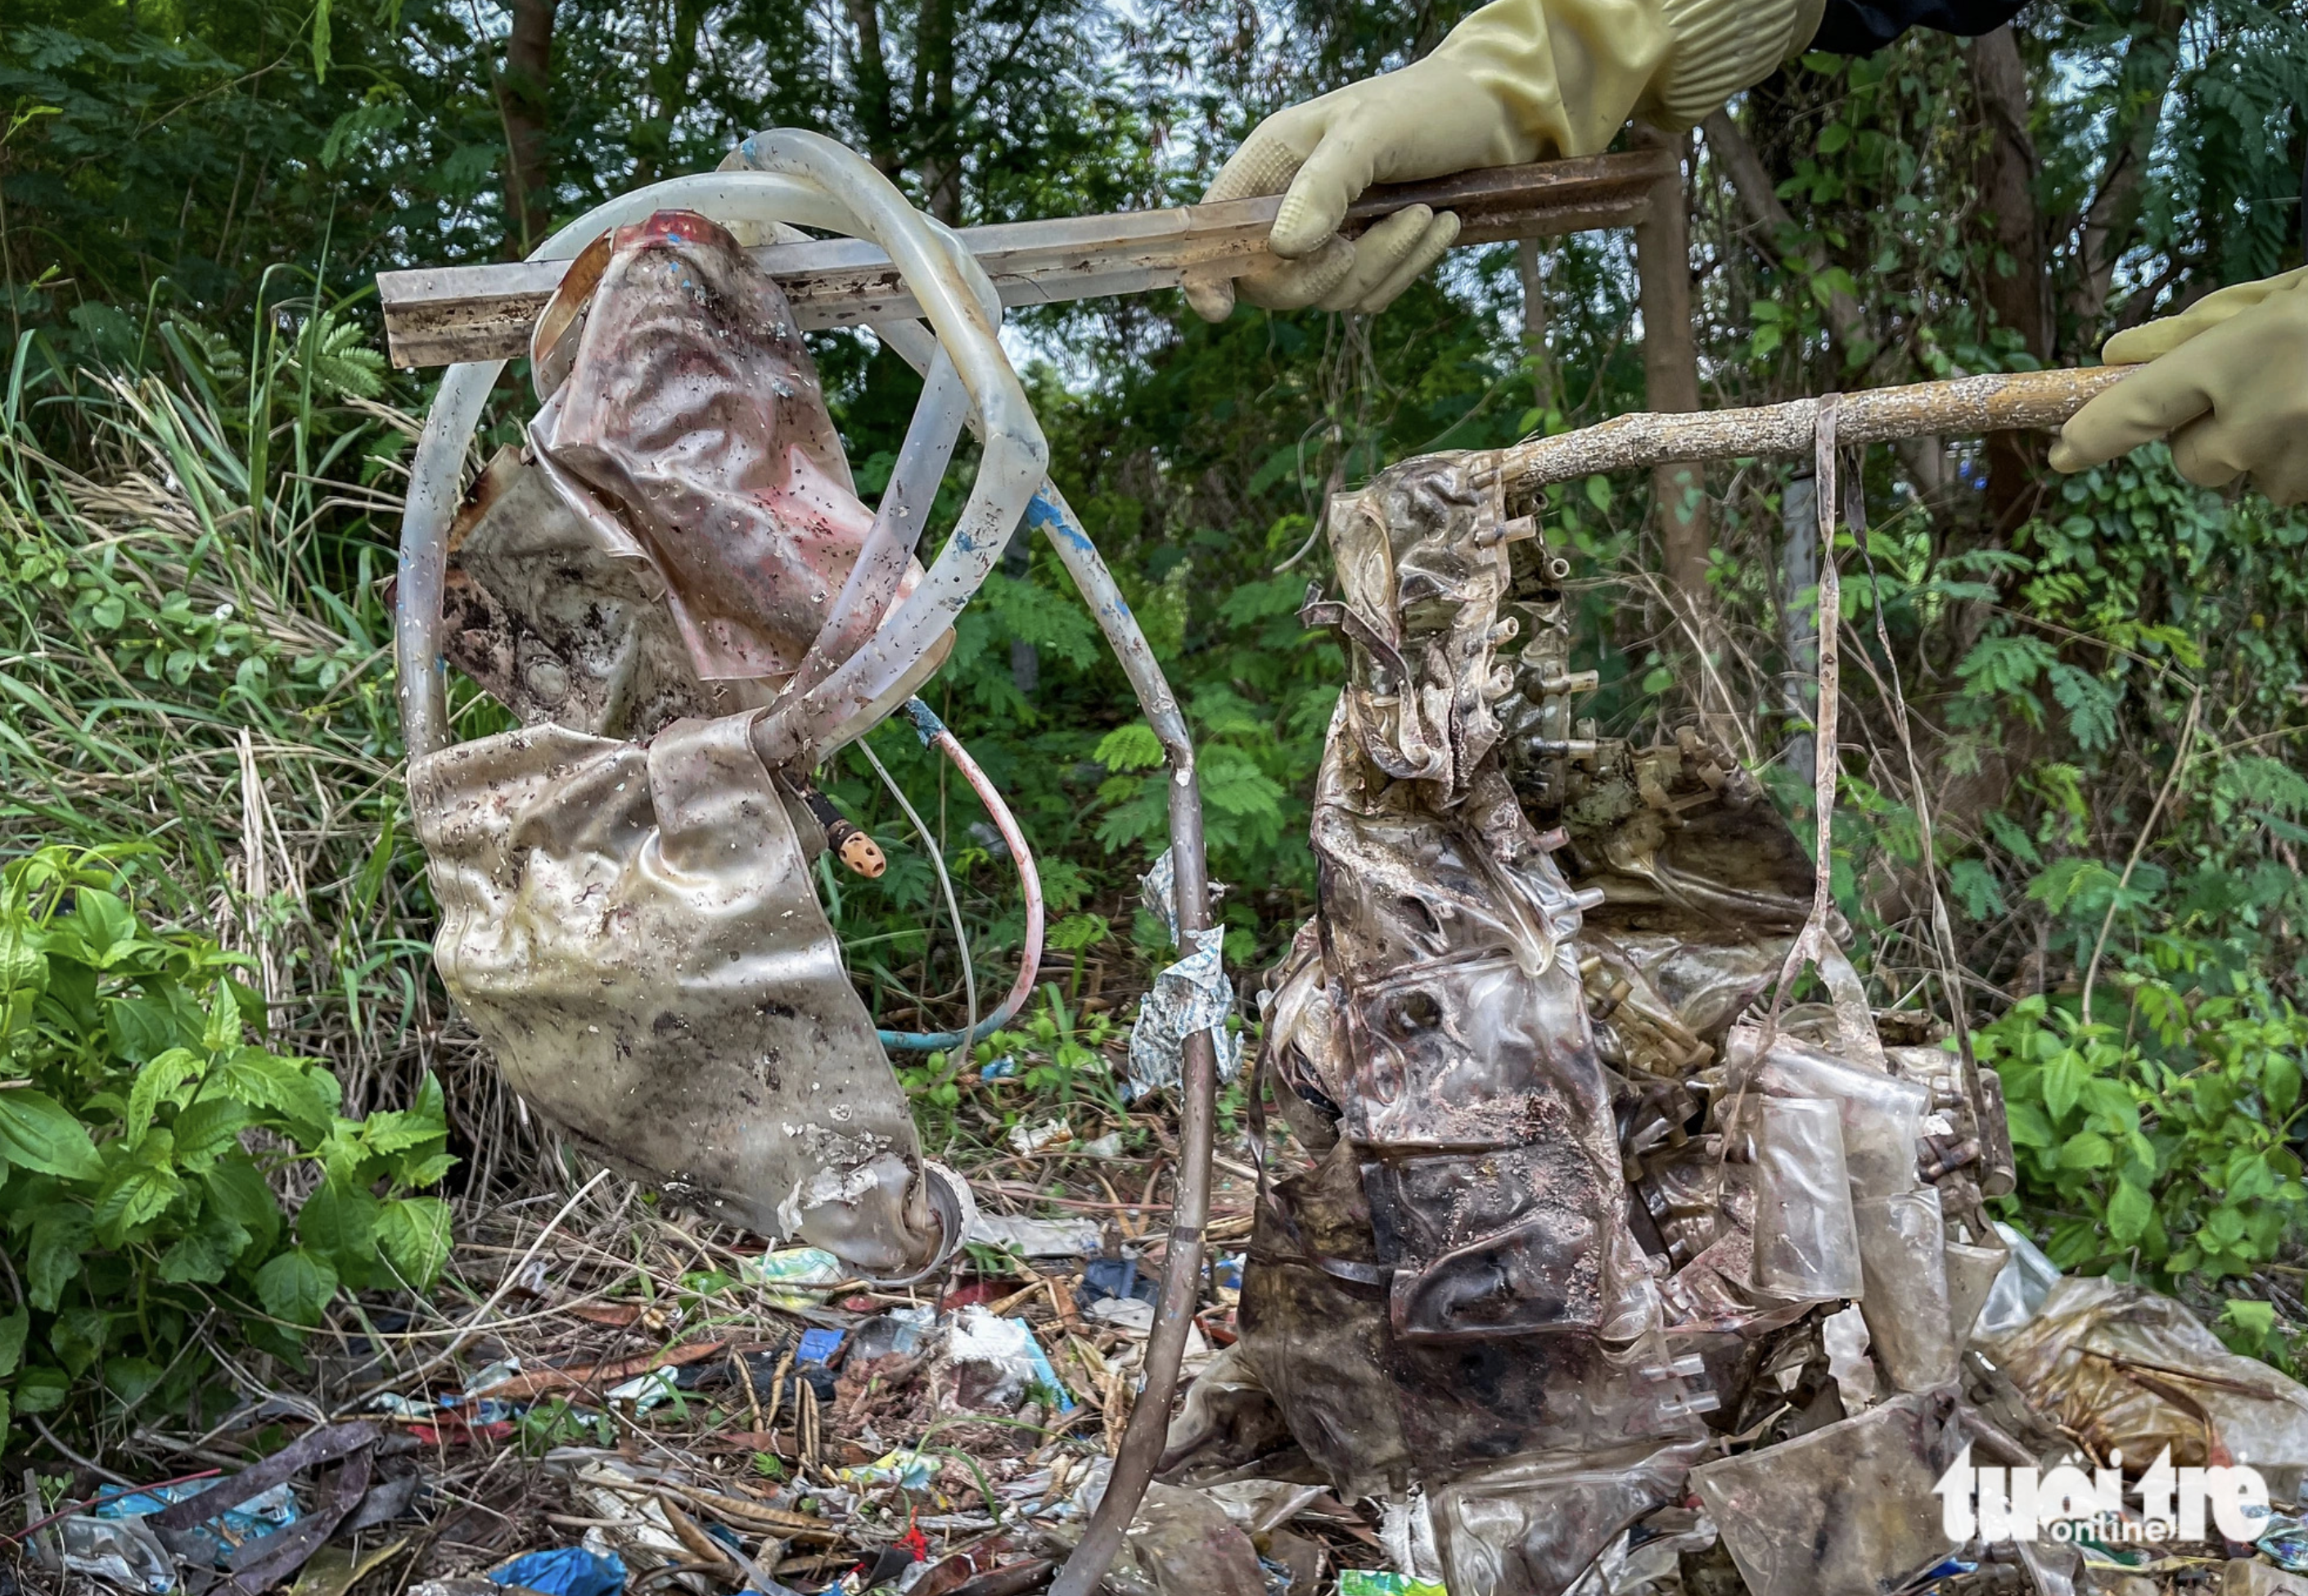 Area along swamp in Ho Chi Minh City covered with medical waste